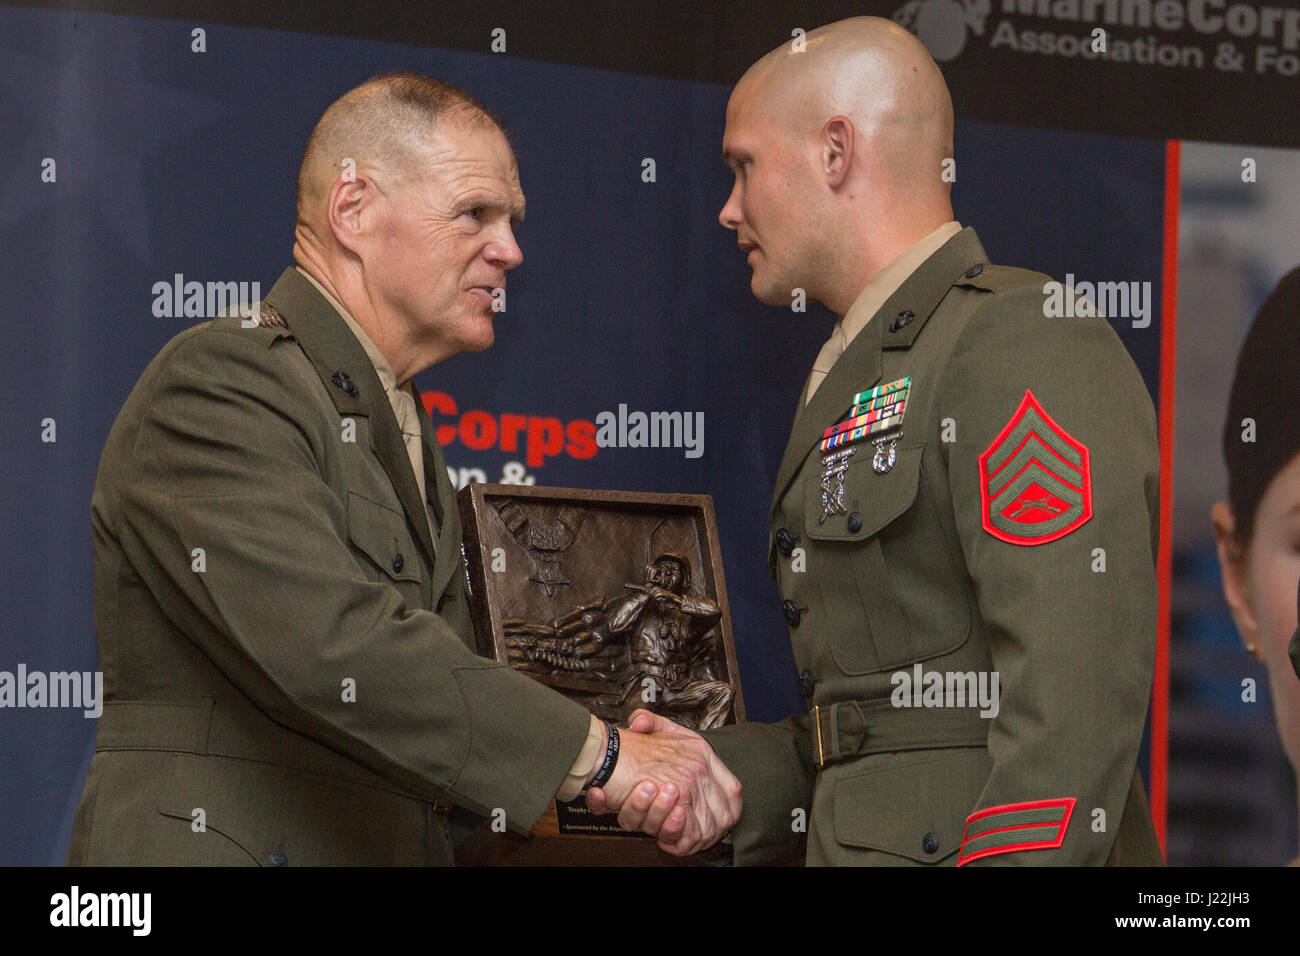 Commandant of the Marine Corps Gen. Robert B. Neller, left, shakes hands with Staff Sgt. Brandon W. Grzyb, recipient of the Pfc. Herbert Littleton Trophy for Staff Noncommissioned Officer Electronic Maintenance Excellence, during the 14th Annual C4 Awards Dinner Arlington, Va., April 20, 2017. While filling a billet normally held by a Chief Warrant Officer 2, Grzyb’s office was directly responsible for the readiness of 4,842 principle end items from 8th Communications Battalion, 2d Law Enforcement Battalion, 2d Expeditionary Operations Training Group, II MEF Headquarters, and II MEF Command El Stock Photo